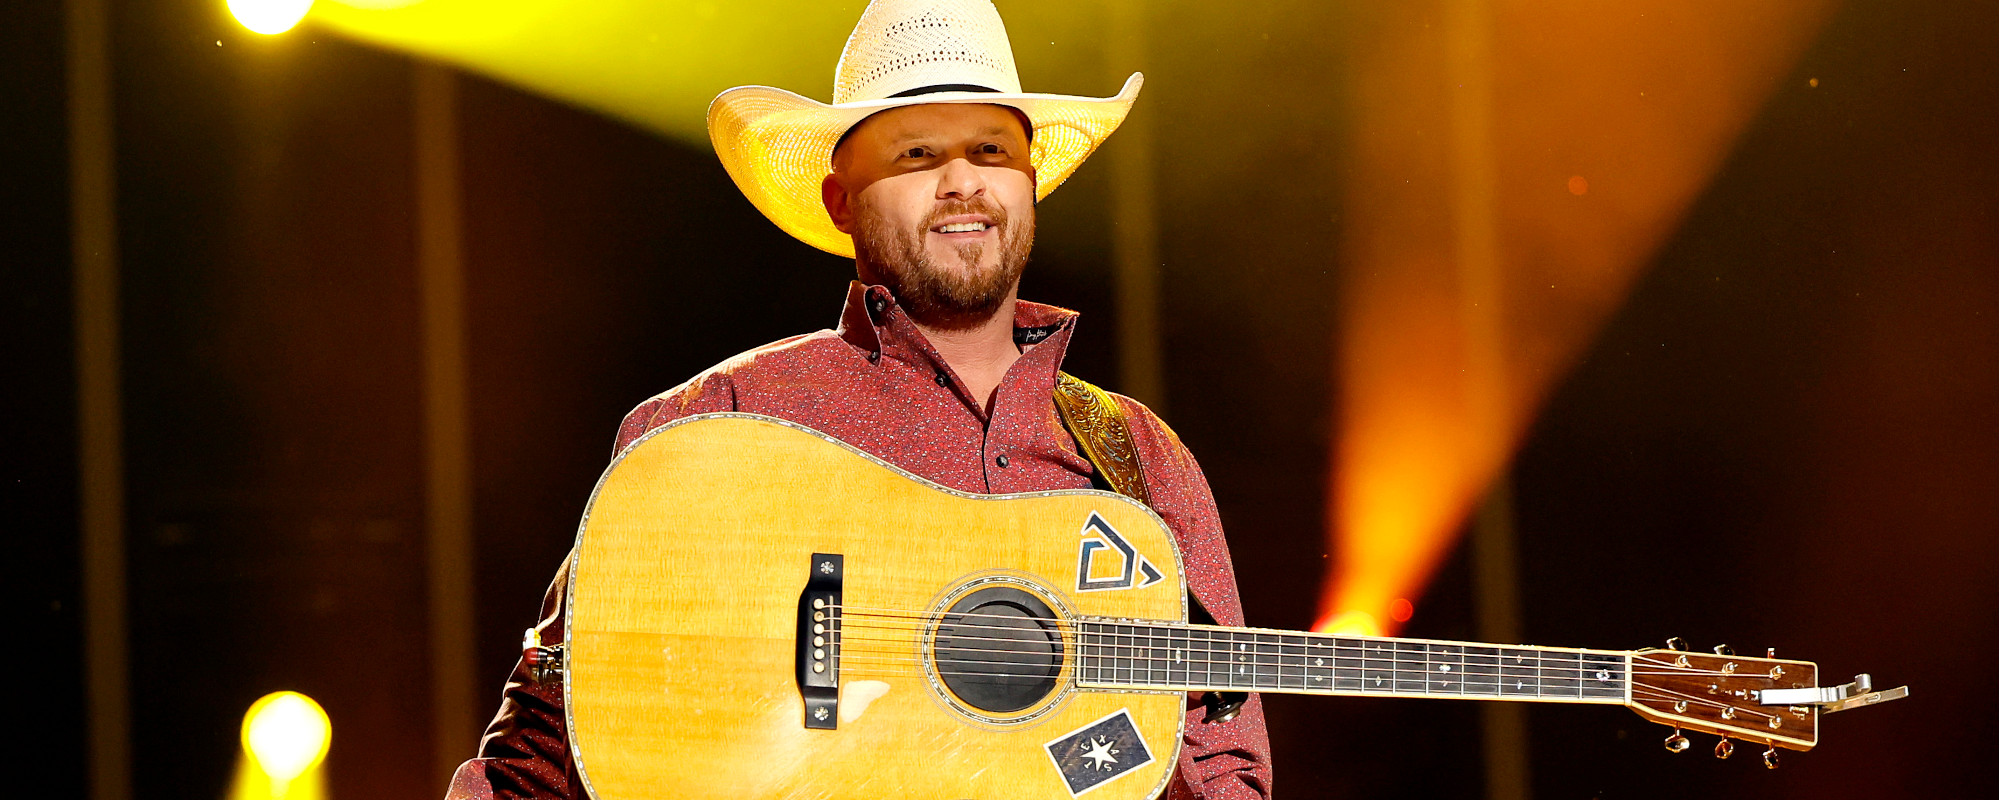 Cody Johnson Opens up About Friendship With Luke Combs: “He’s Done a Lot for Me”